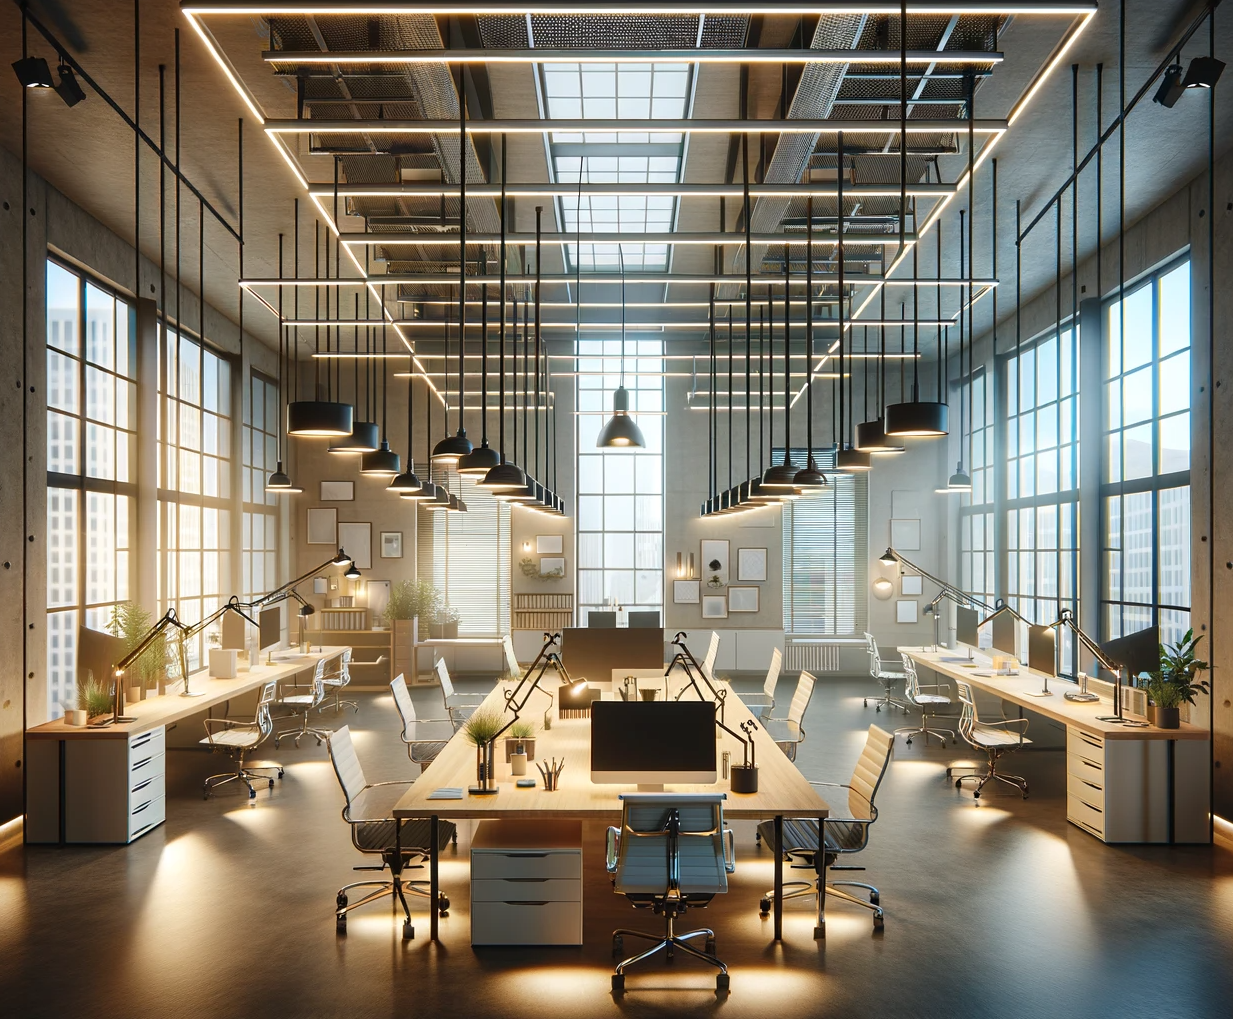 DALL·E 2023-12-19 16.33.56 - An image of an office space with adjustable lighting. The office is designed with a variety of lighting options that can be adjusted to suit different